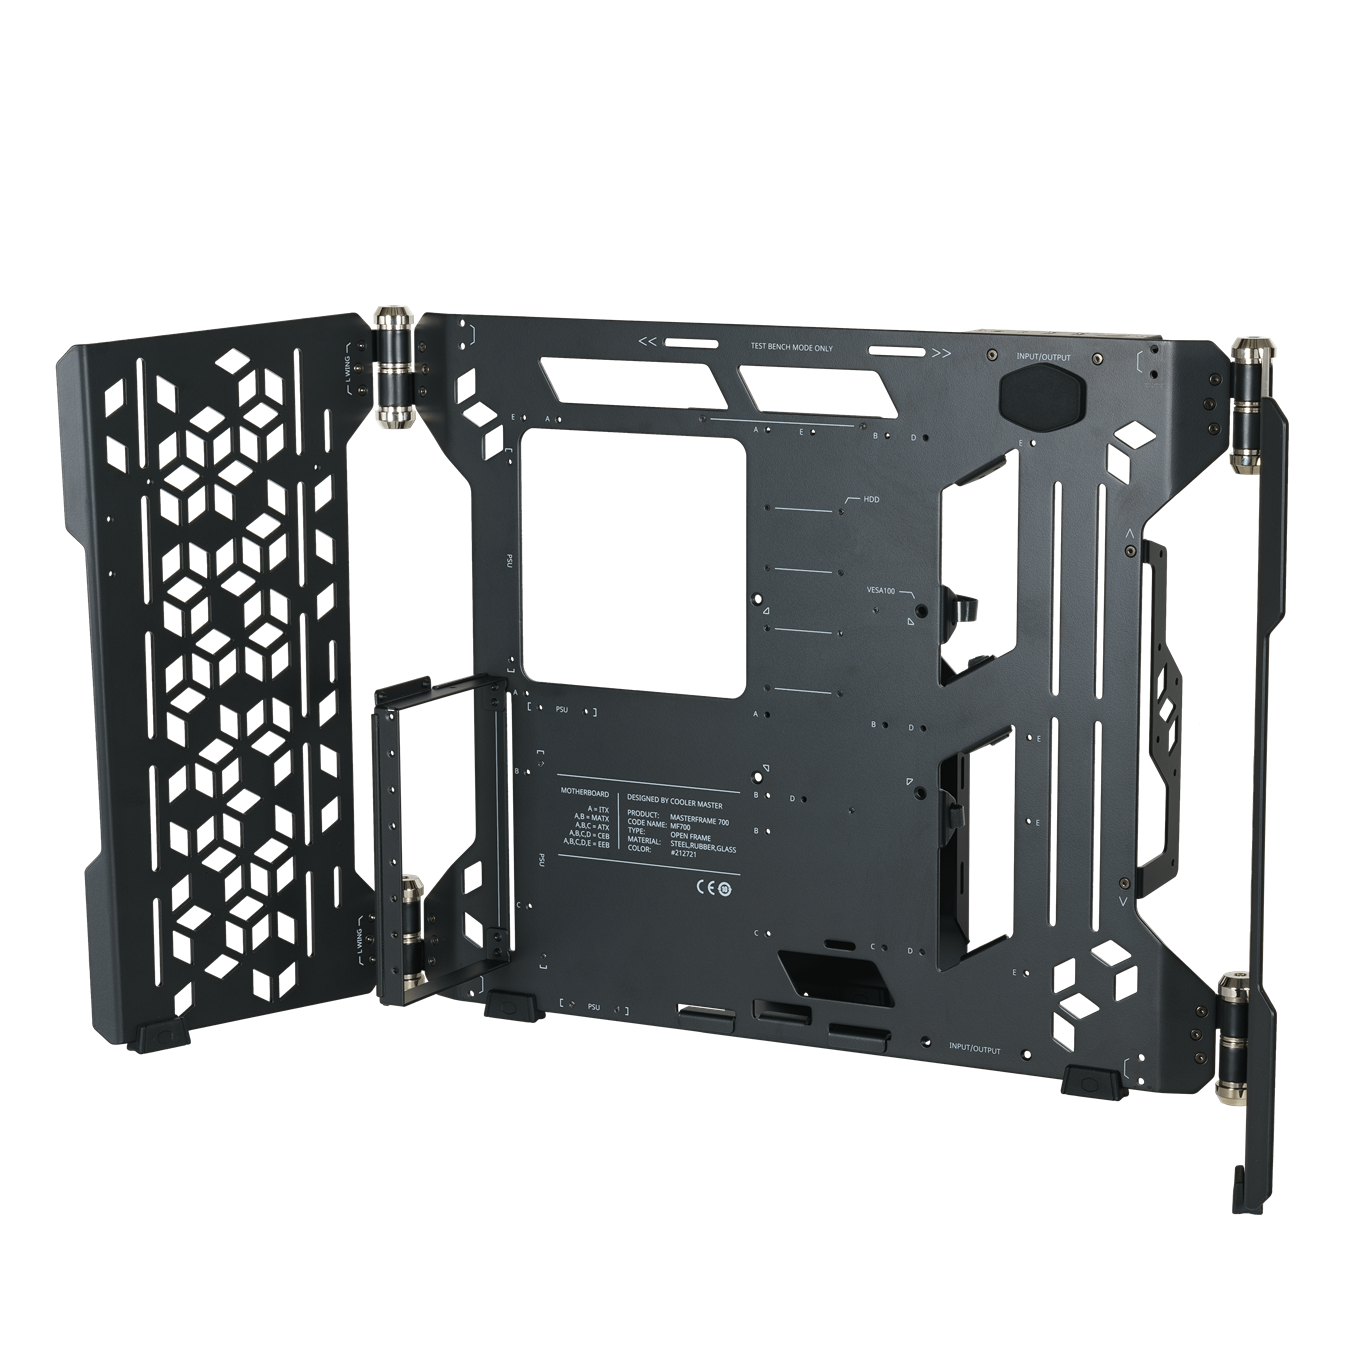 MasterFrame 700 - is designed with customization in mind. The 3-parts frame can be easily disassembled easily for painting, wrapping and other modifications.